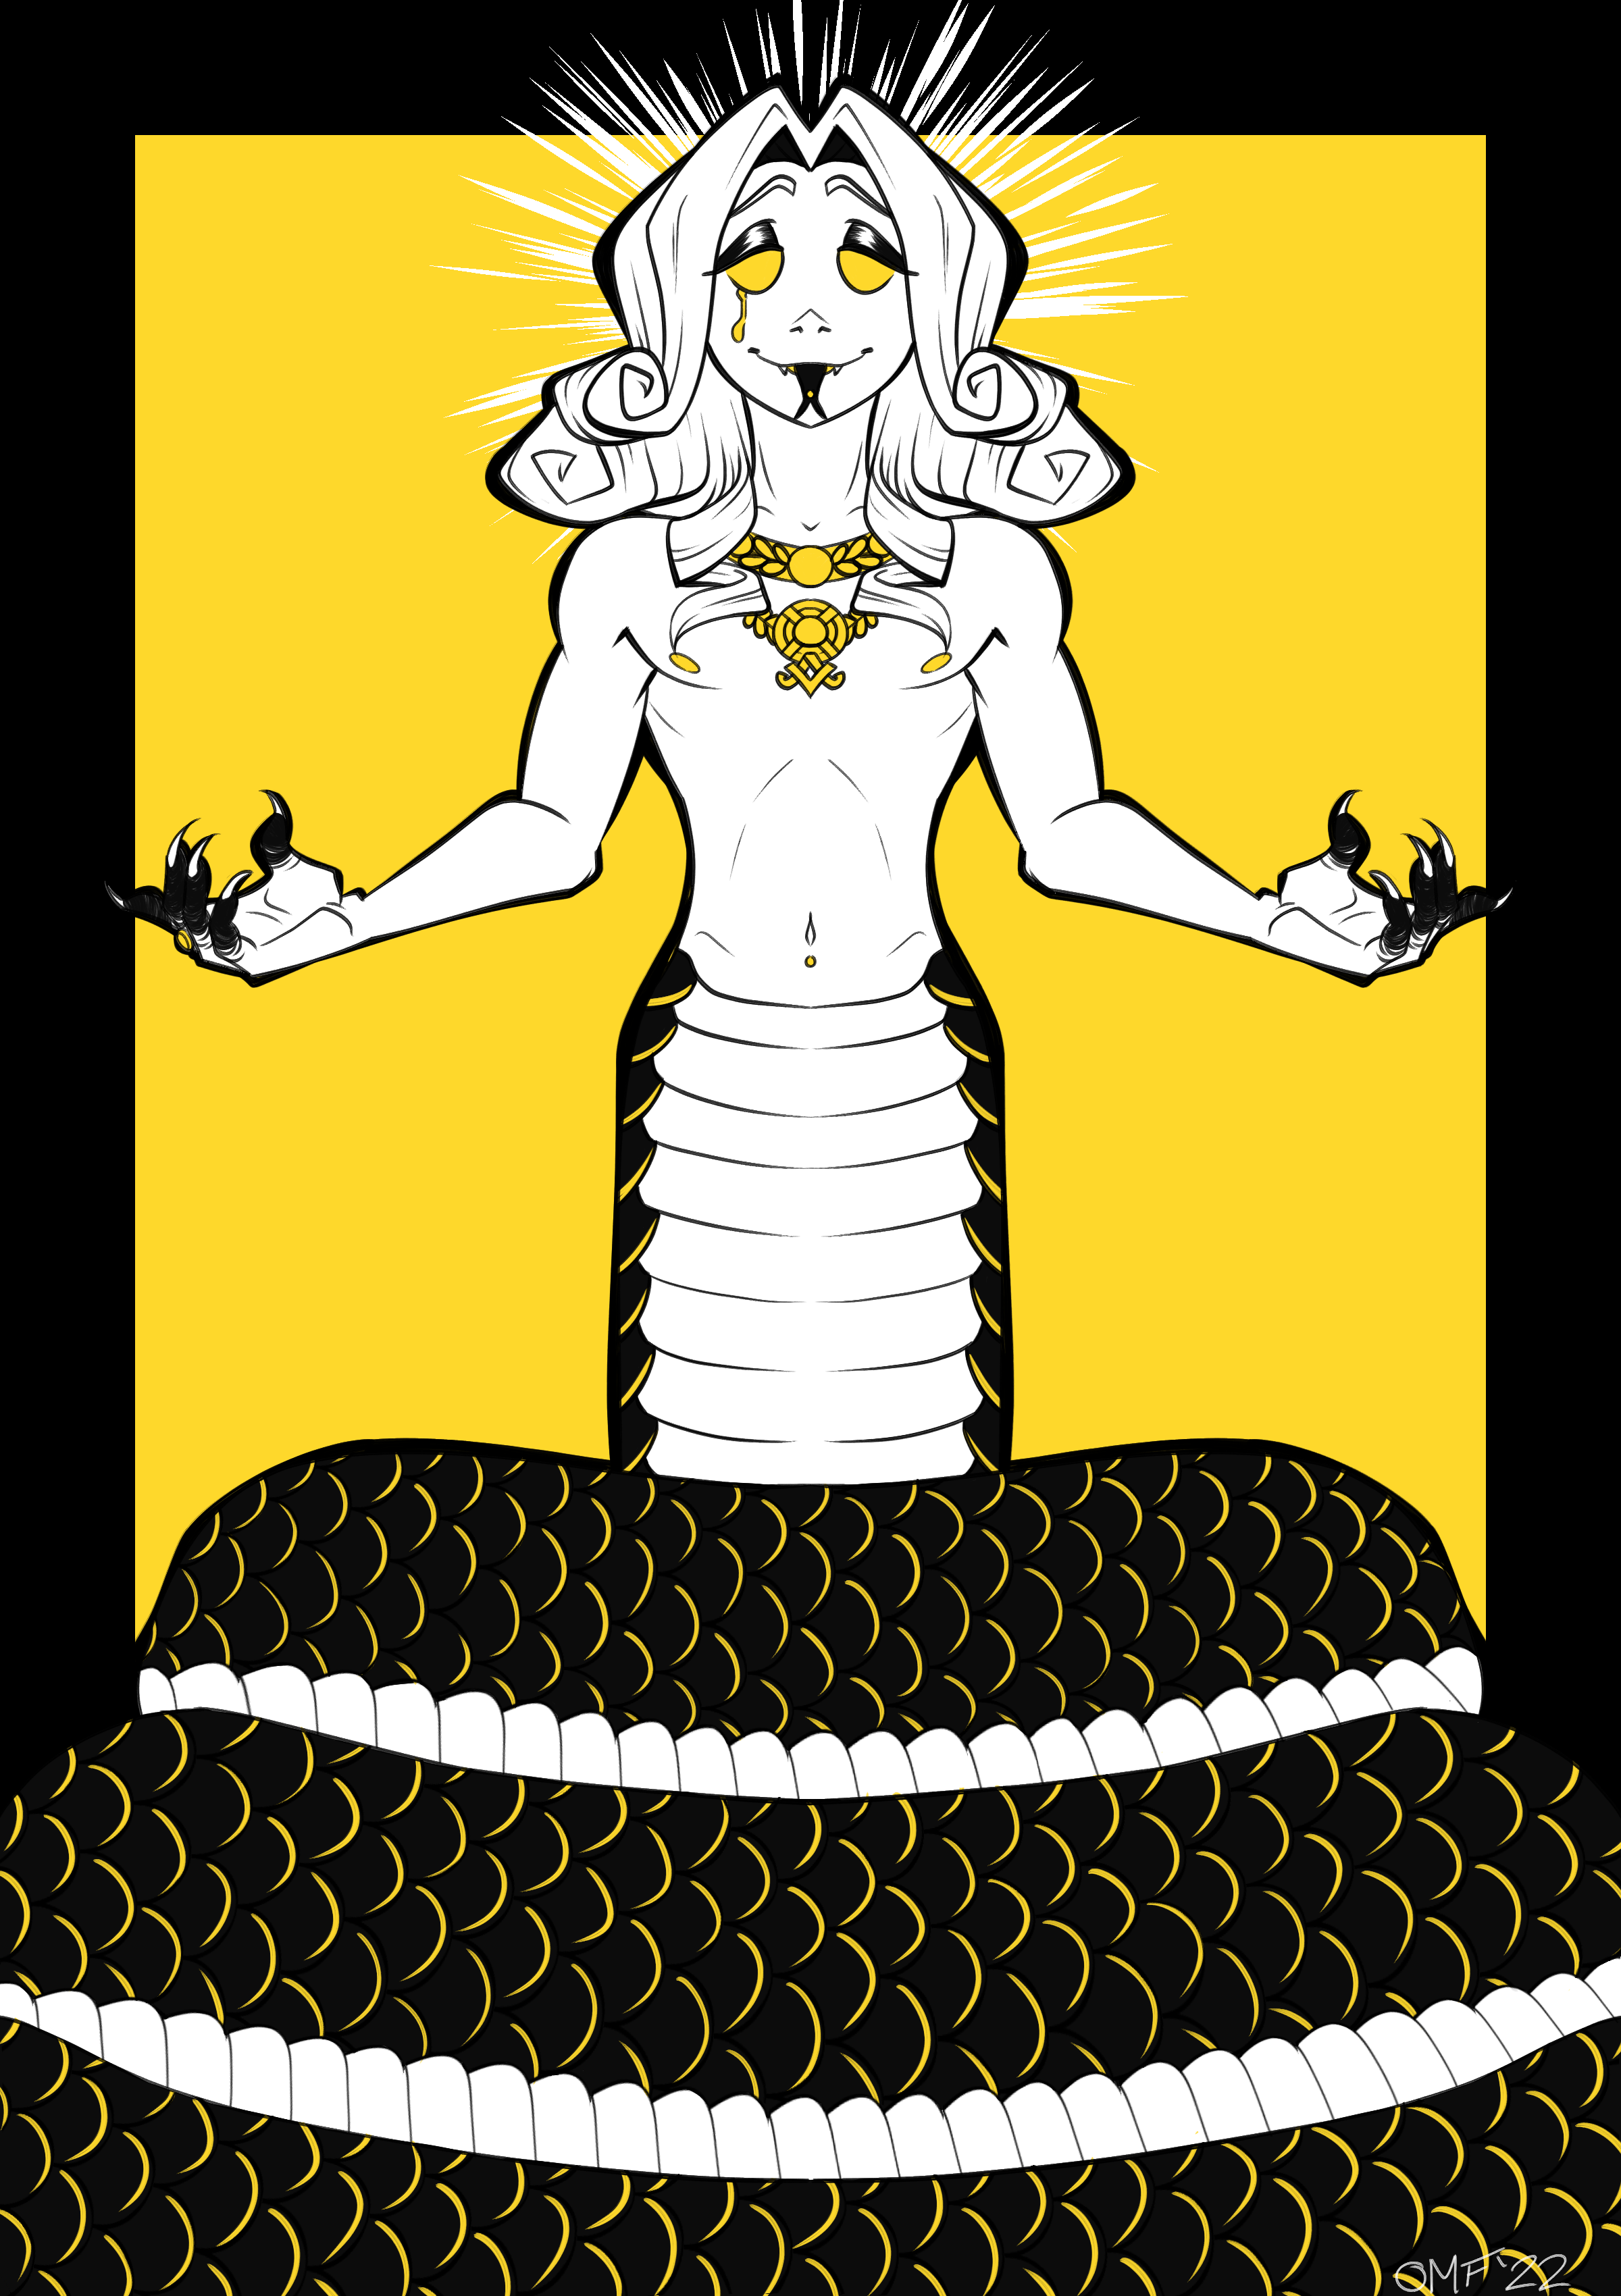 A symmetrical line drawing of a naga character. They have their arms outstretched at either side and are smiling with half-lidded eyes, while their tail curls around them. They have mid-length hair that curls up at the end into a bob and are wearing various necklaces. Their tail is black, but the scales are highlighted in yellow. The background is a square of that same yellow surrounded by a black border. There is a white sun ray halow surrounding the naga's head.